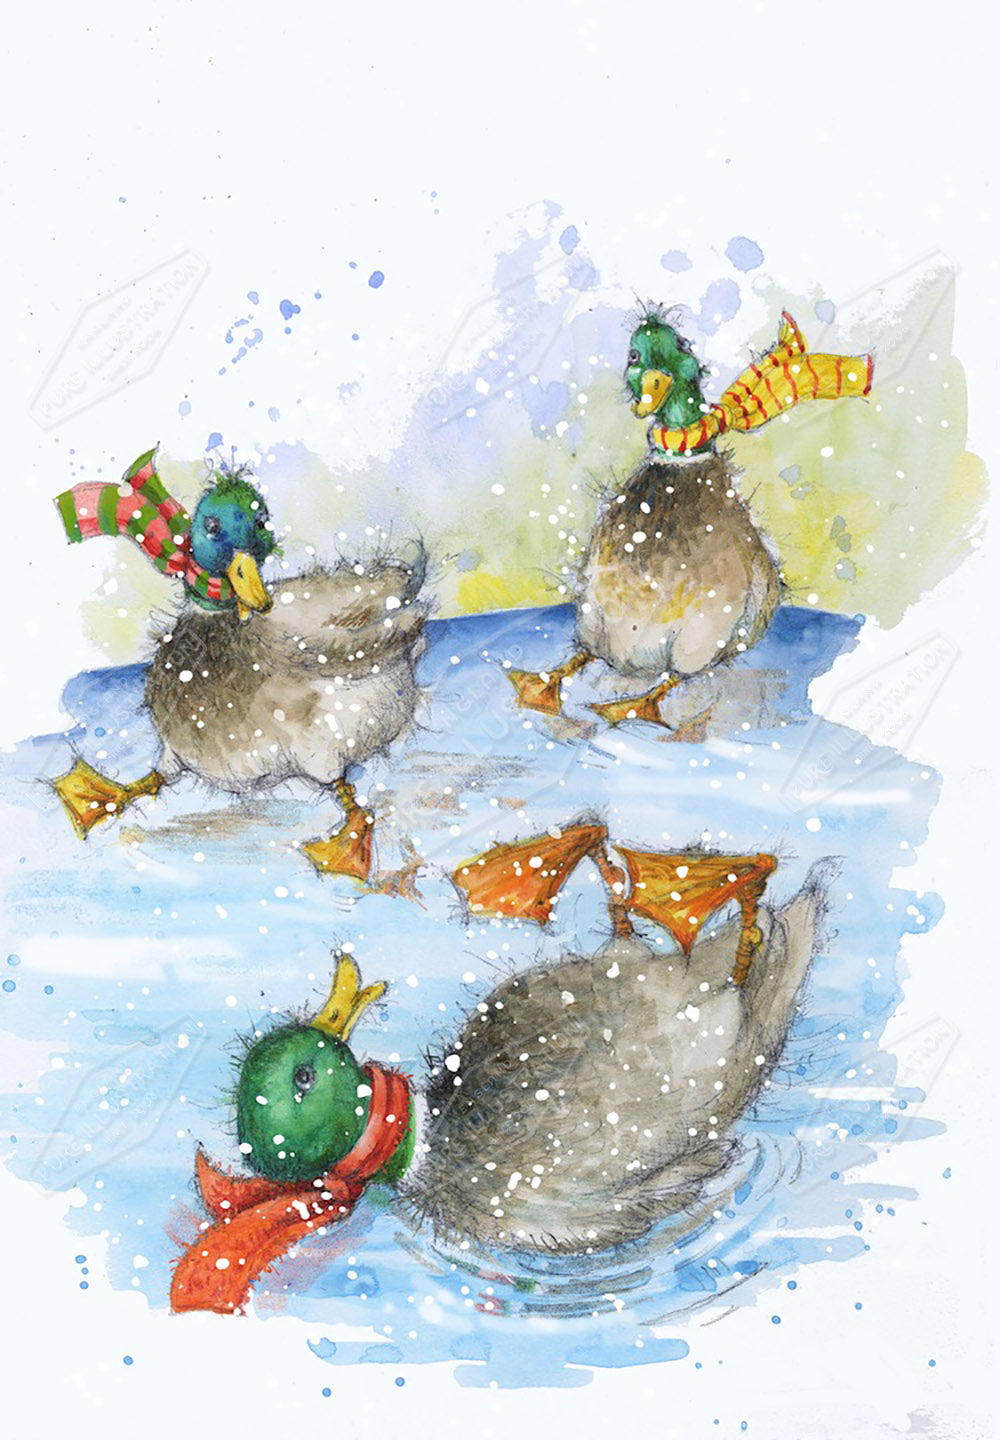 00024043JPA- Jan Pashley is represented by Pure Art Licensing Agency - Christmas Greeting Card Design